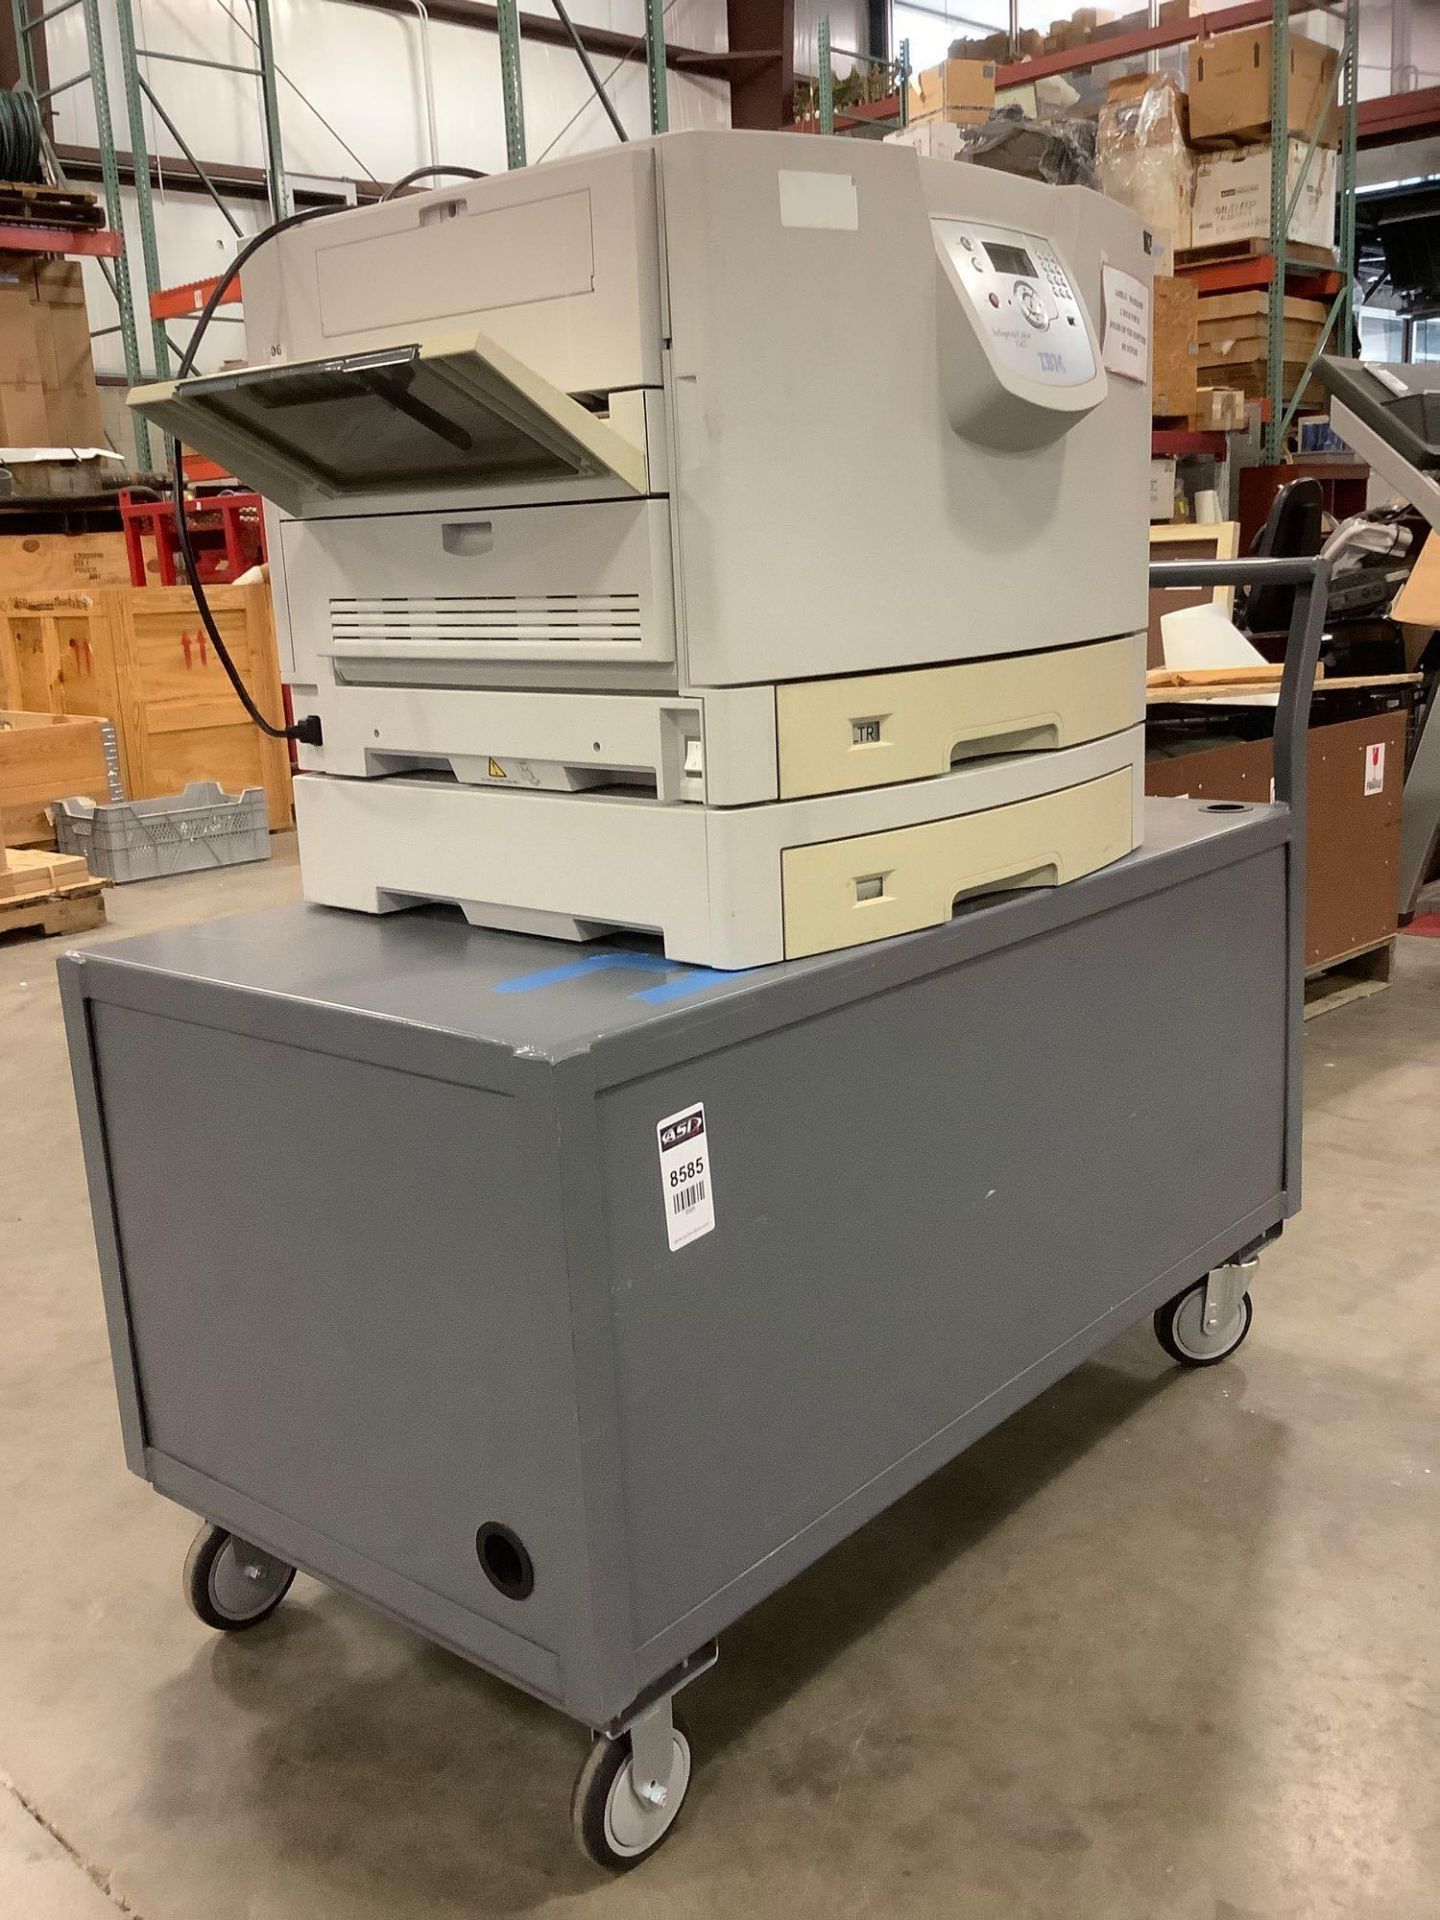 IBM INFORPRINT COLOR 1567 PRINTER TYPE 4935 ON ROLLING CART STAND - Image 5 of 18